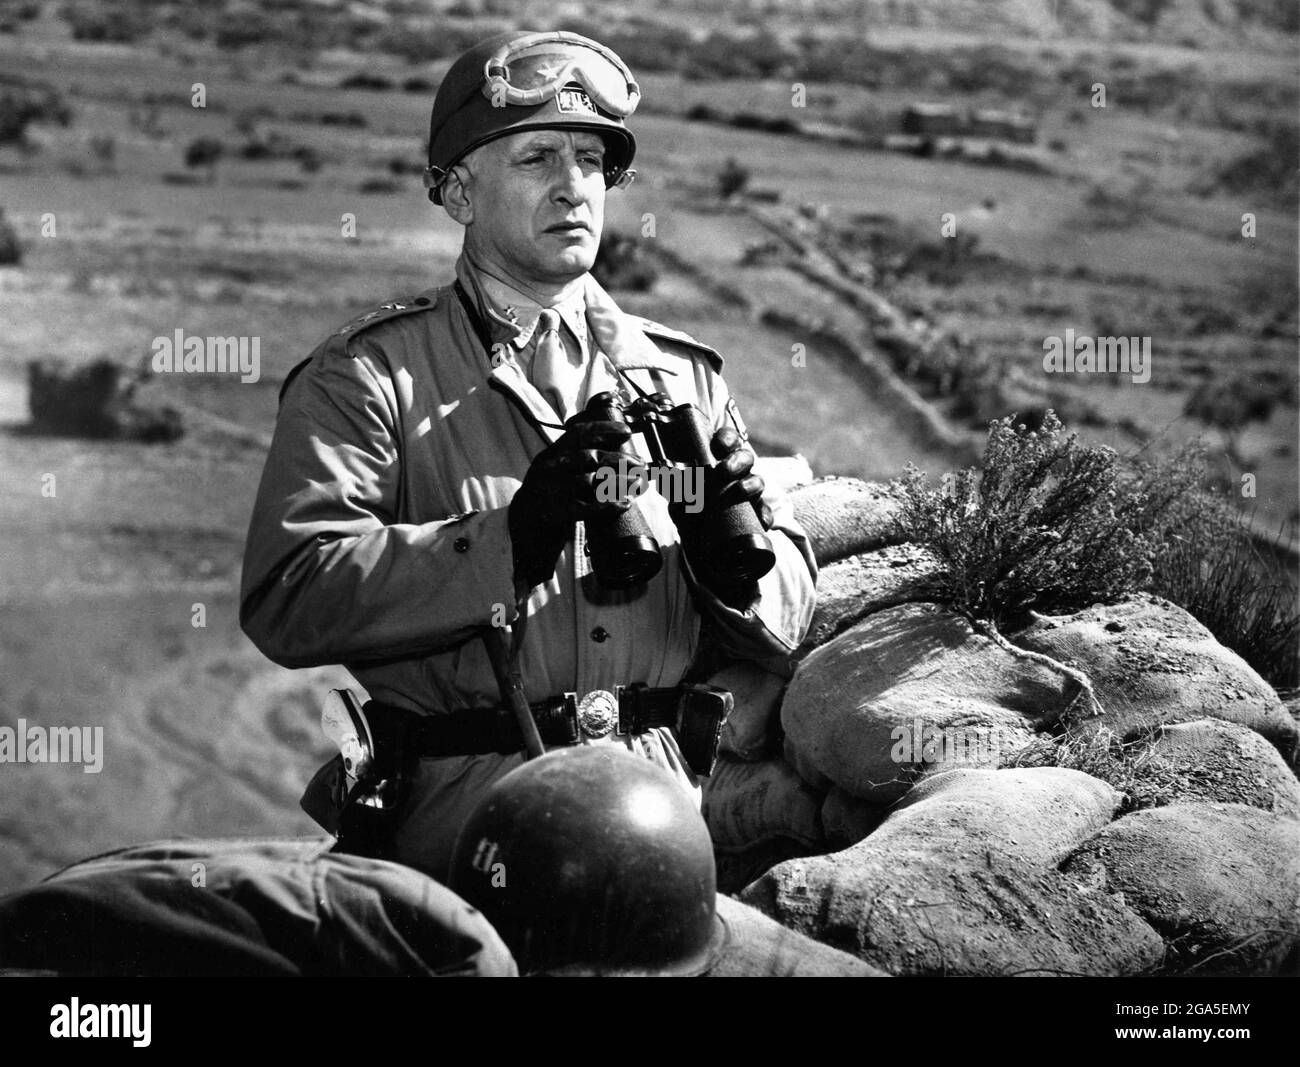 GEORGE C. SCOTT in his Oscar Winning role as General George S. Patton Jr in PATTON : LUST FOR GLORY 1970 director FRANKLIN J. SCHAFFNER screen story and screenplay Francis Ford Coppola and Edmund H. North music Jerry Goldsmith Twentieth Century Fox Stock Photo